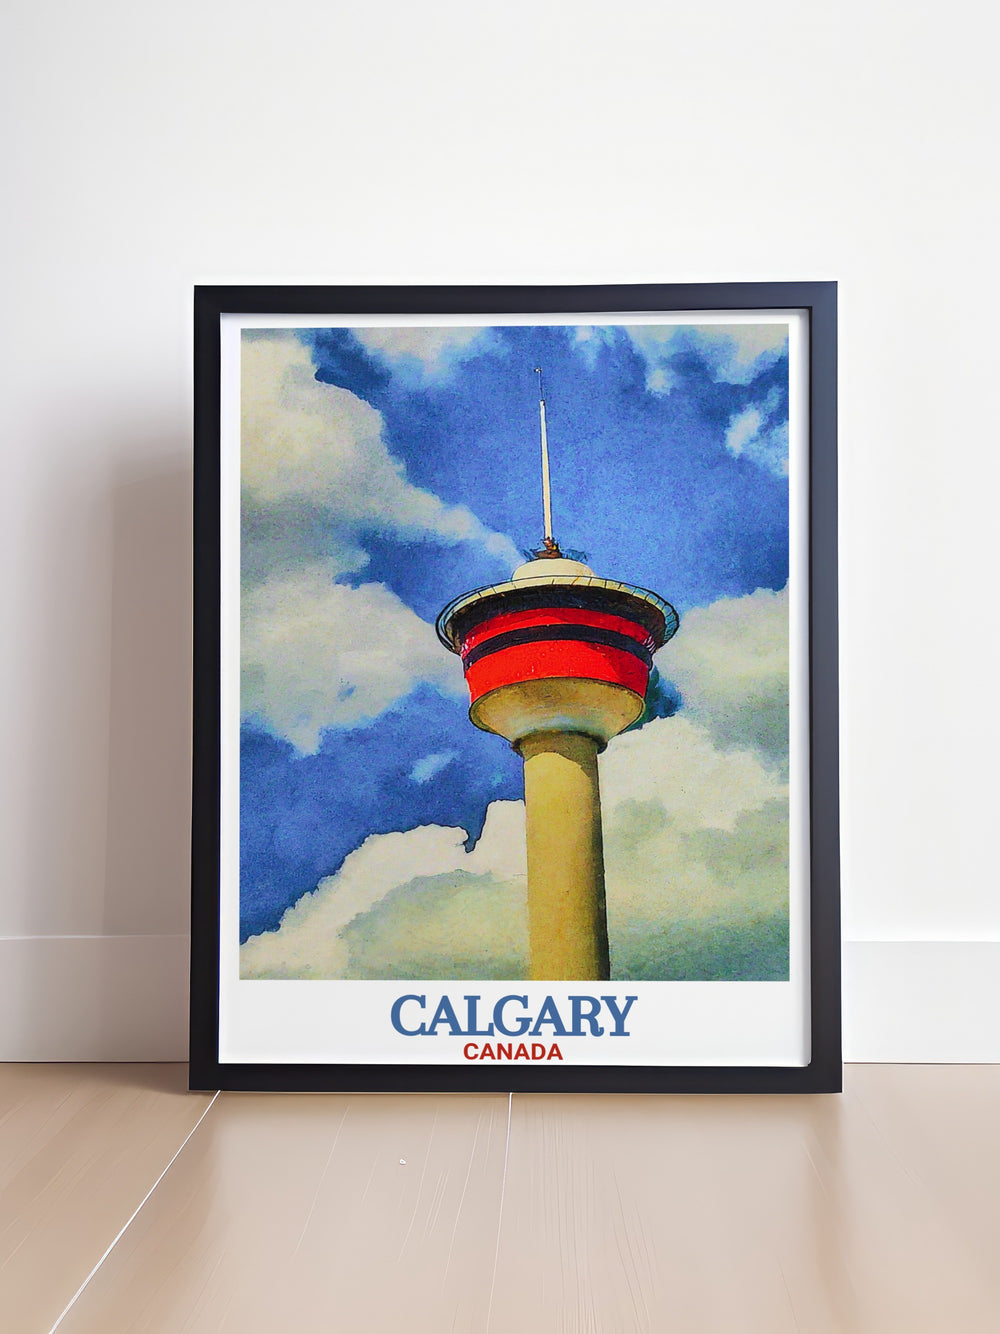 Elevate your home decor with a Calgary Tower print showcasing the architectural marvel of this iconic landmark. This Canada travel print is perfect for adding a touch of elegance and cultural significance to any room in your home.